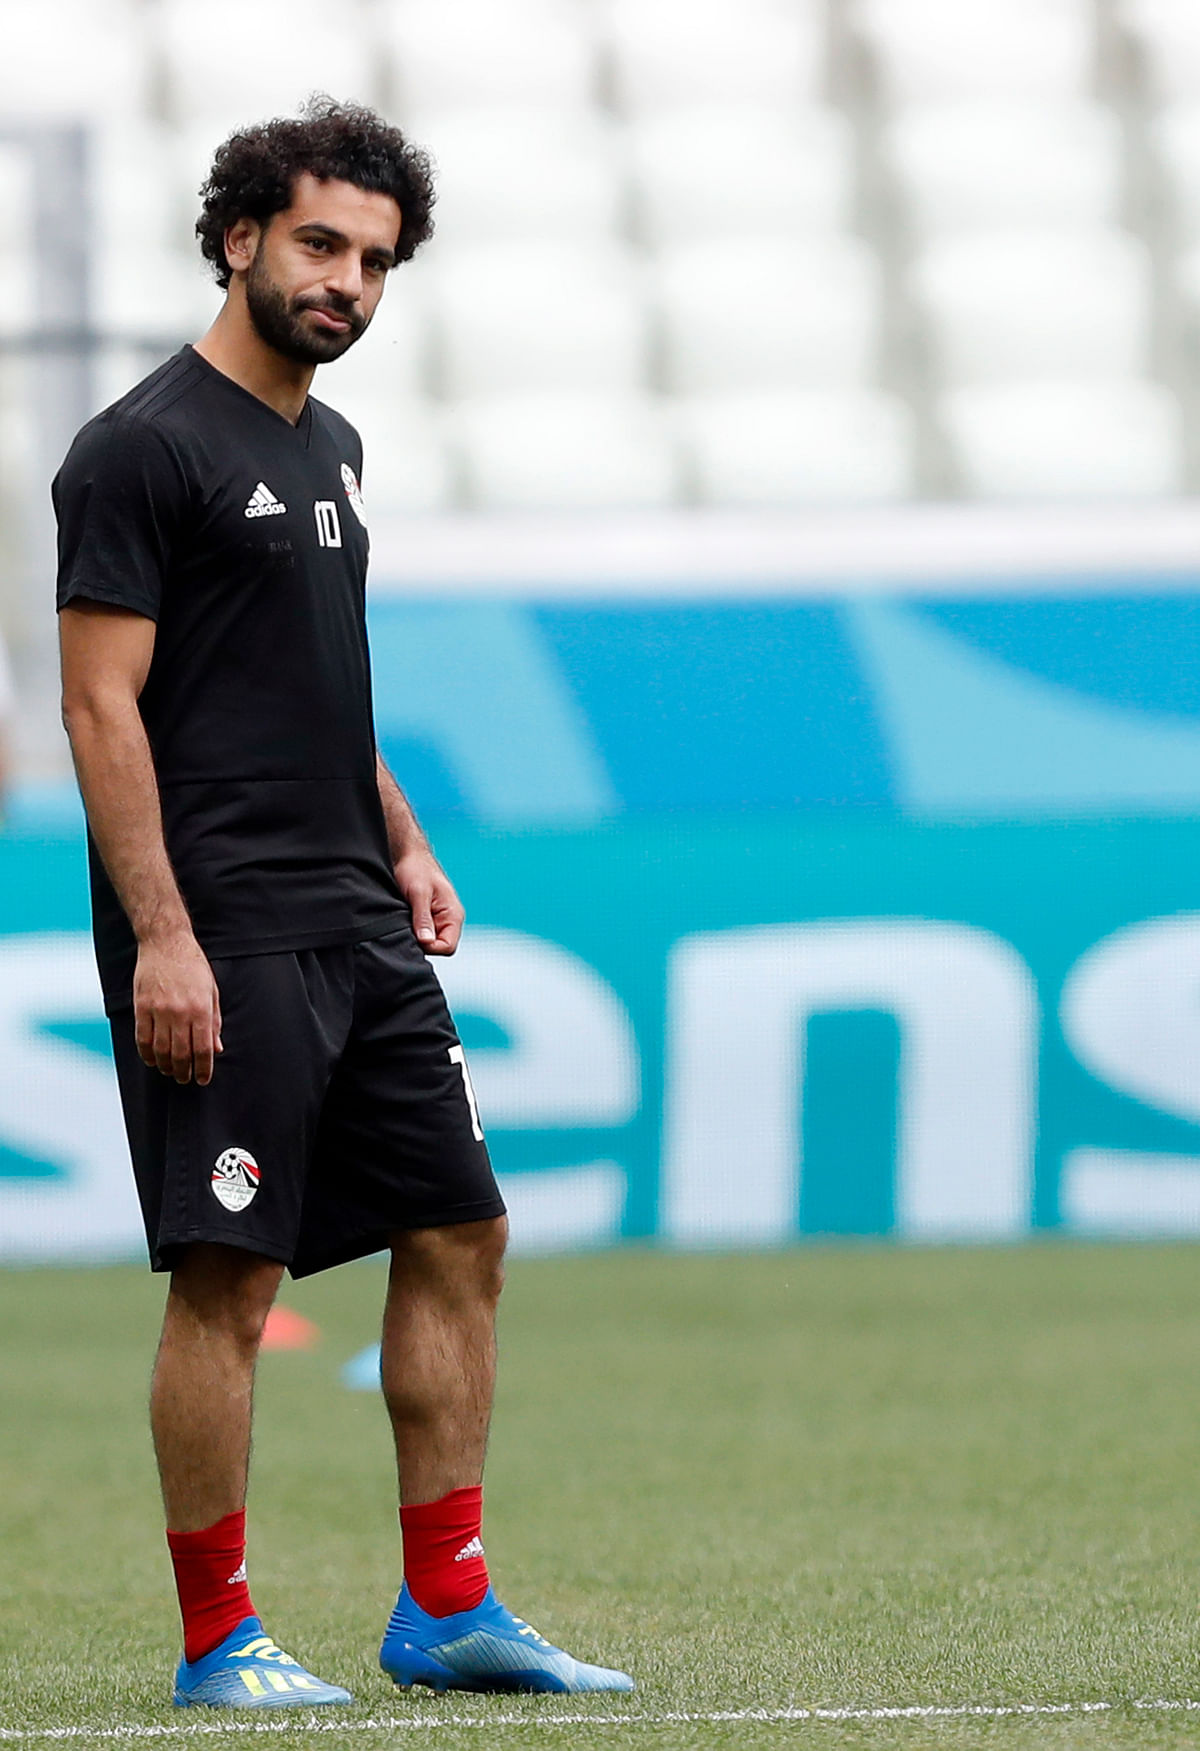 Egypt Football Association denied reports that Mohamed Salah was on the verge of quitting international football.